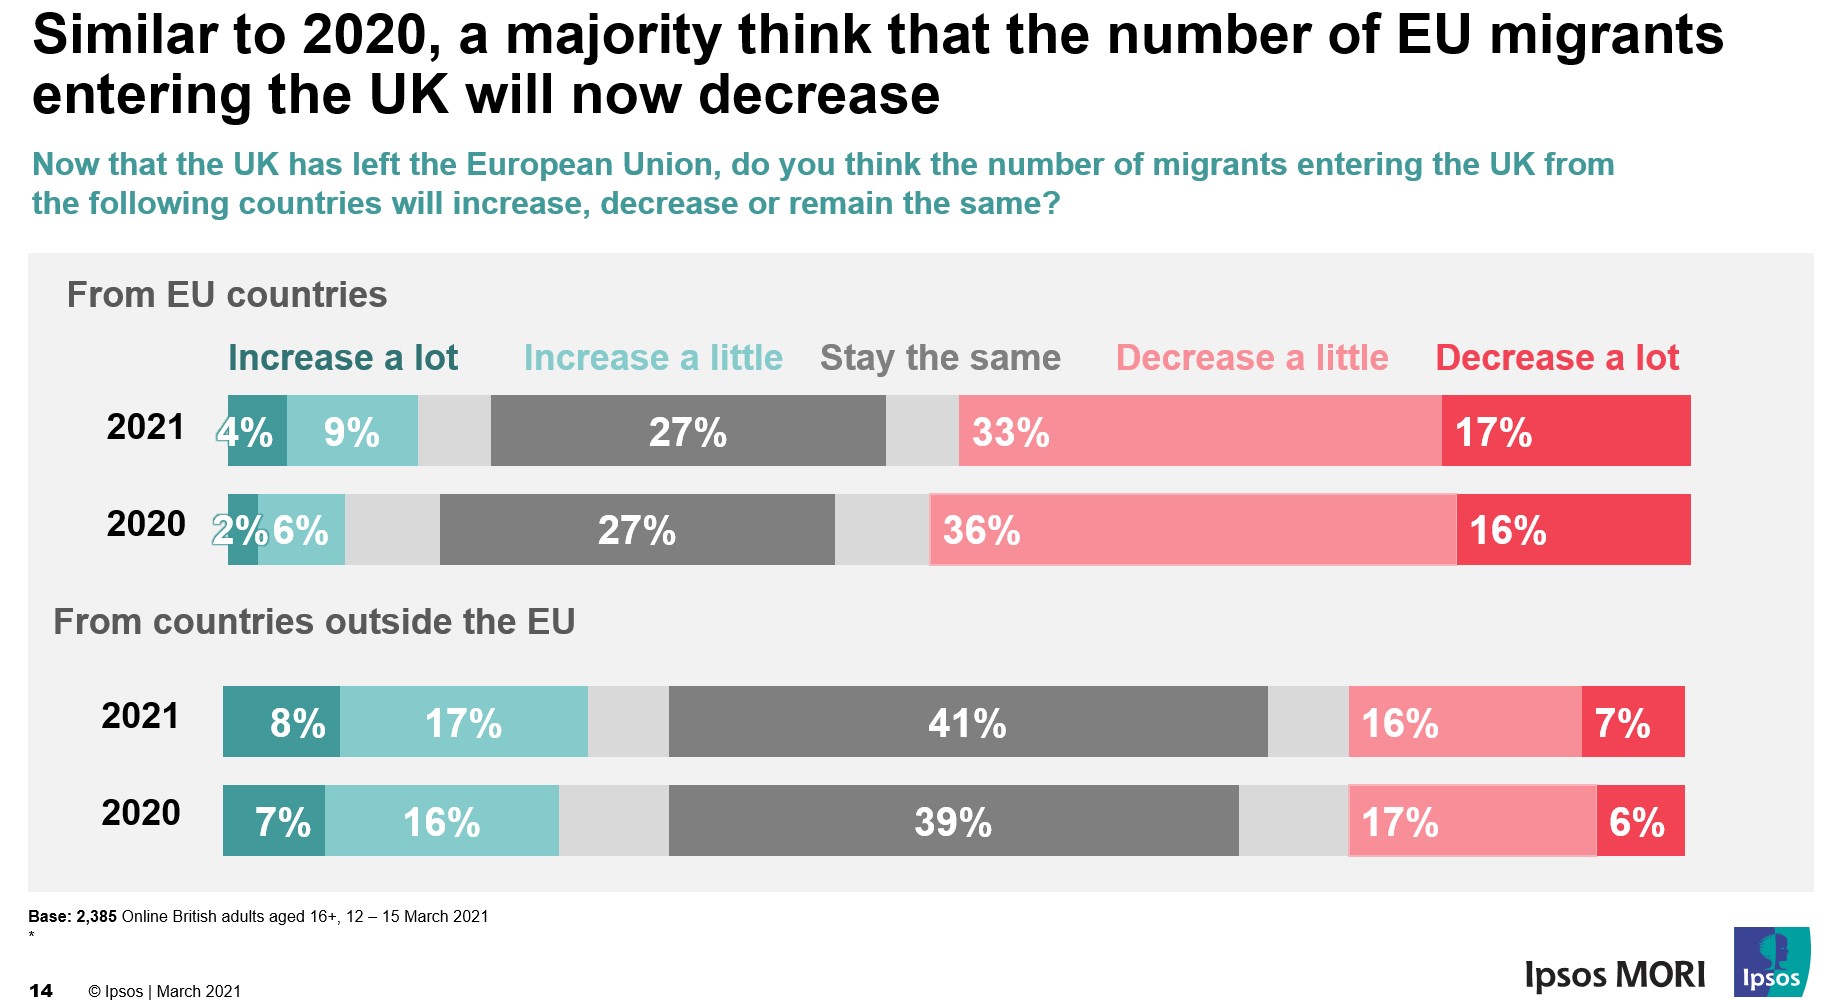 A majority think the number of migrants entering the UK from the EU will decrease